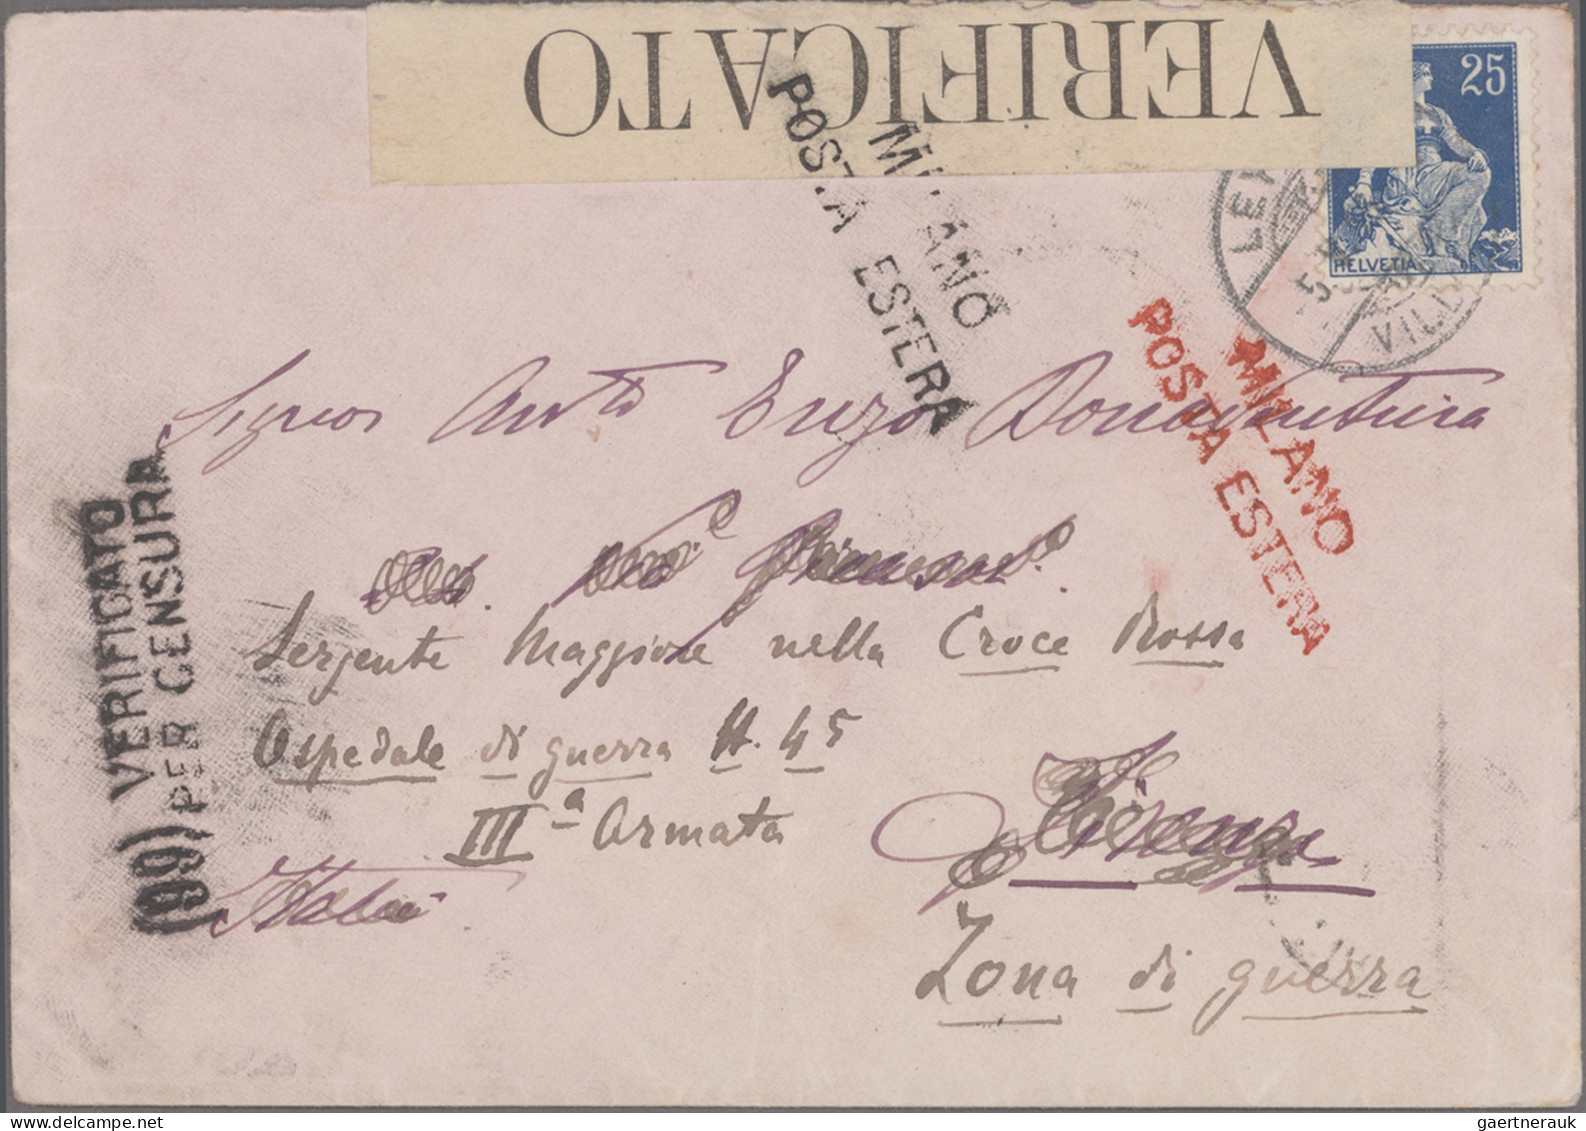 Italy: 1845/1945 (ca), around 1000 covers, mostly better, from all periods, a fe